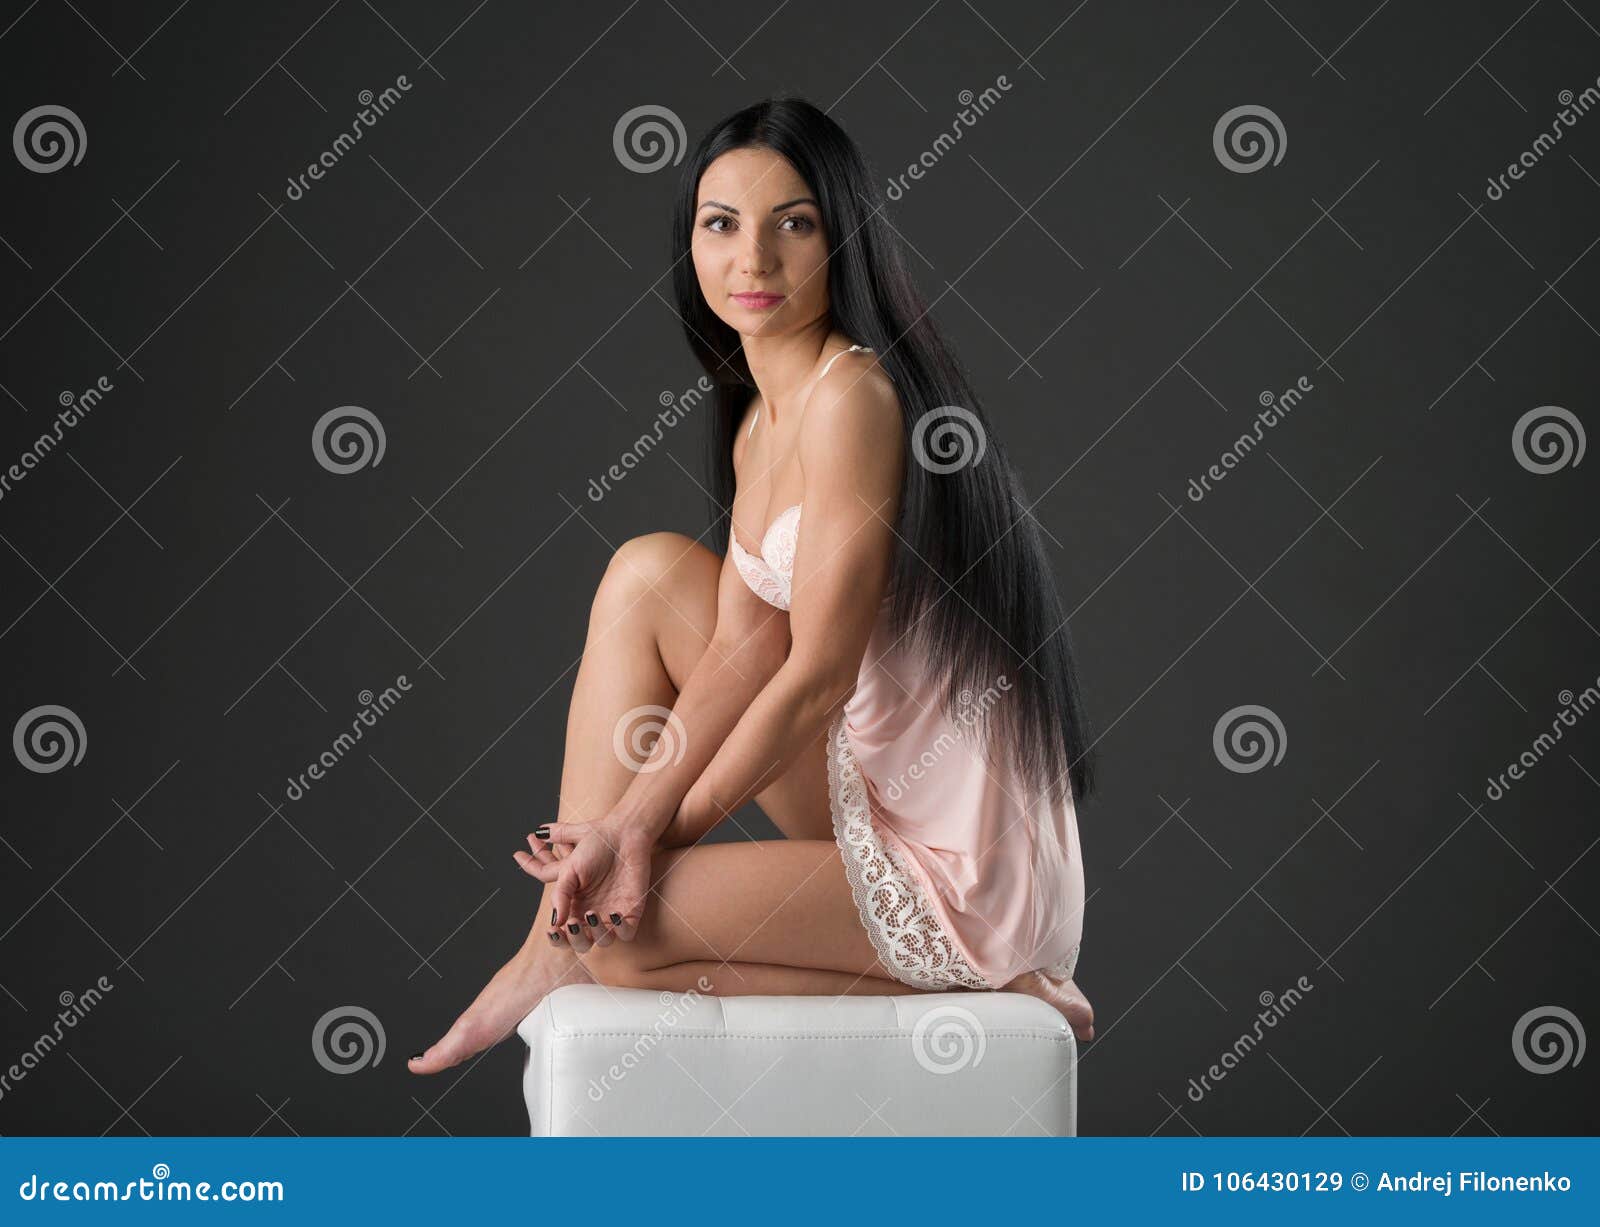 black-haired model in a pink nightie posing on top of a white puff